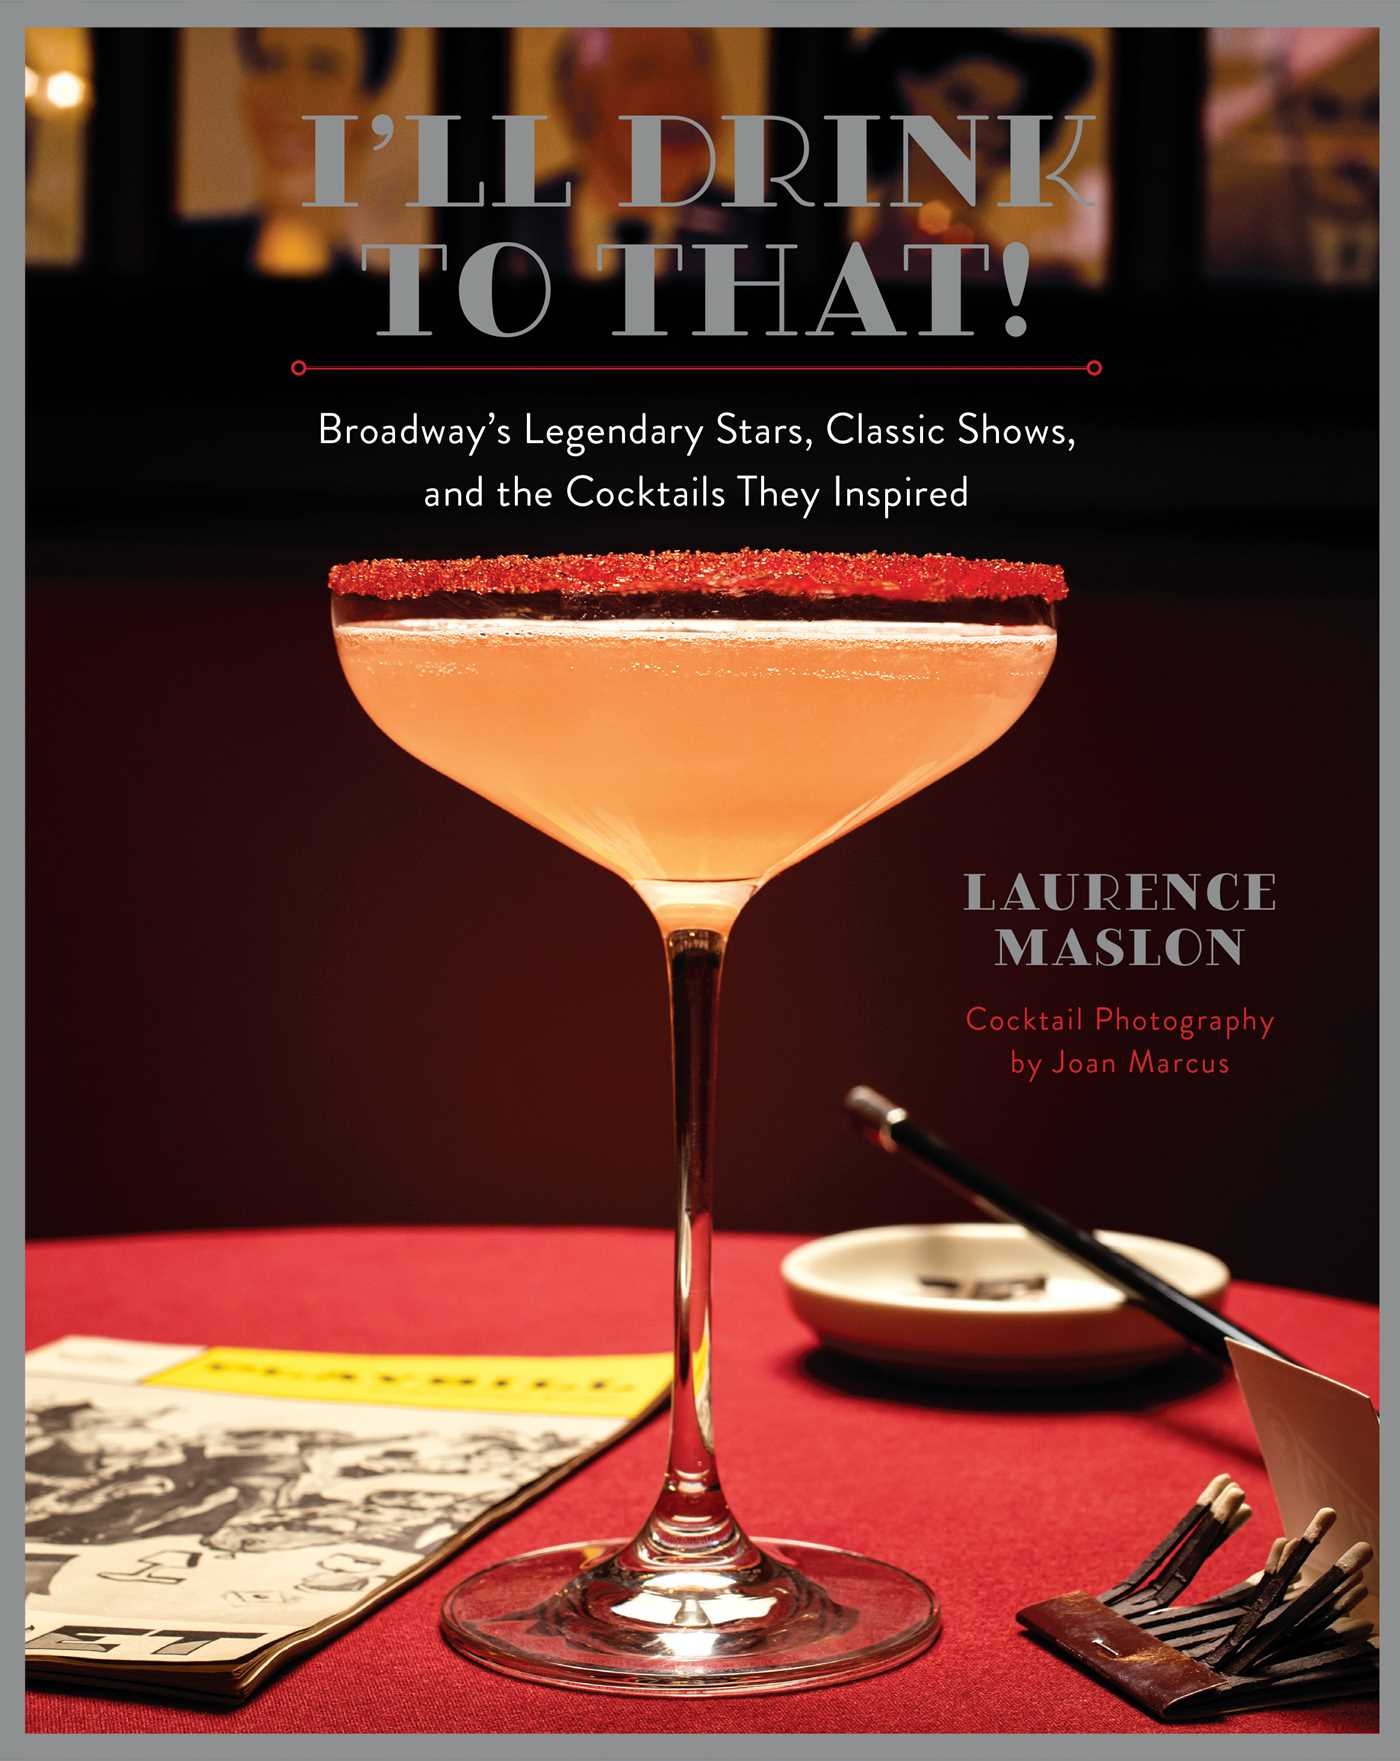 I'll Drink to That! Broadway's Legendary Stars, Classic Shows, and the Cocktails They Inspired By Laurence Maslon Photographer Joan Marcus